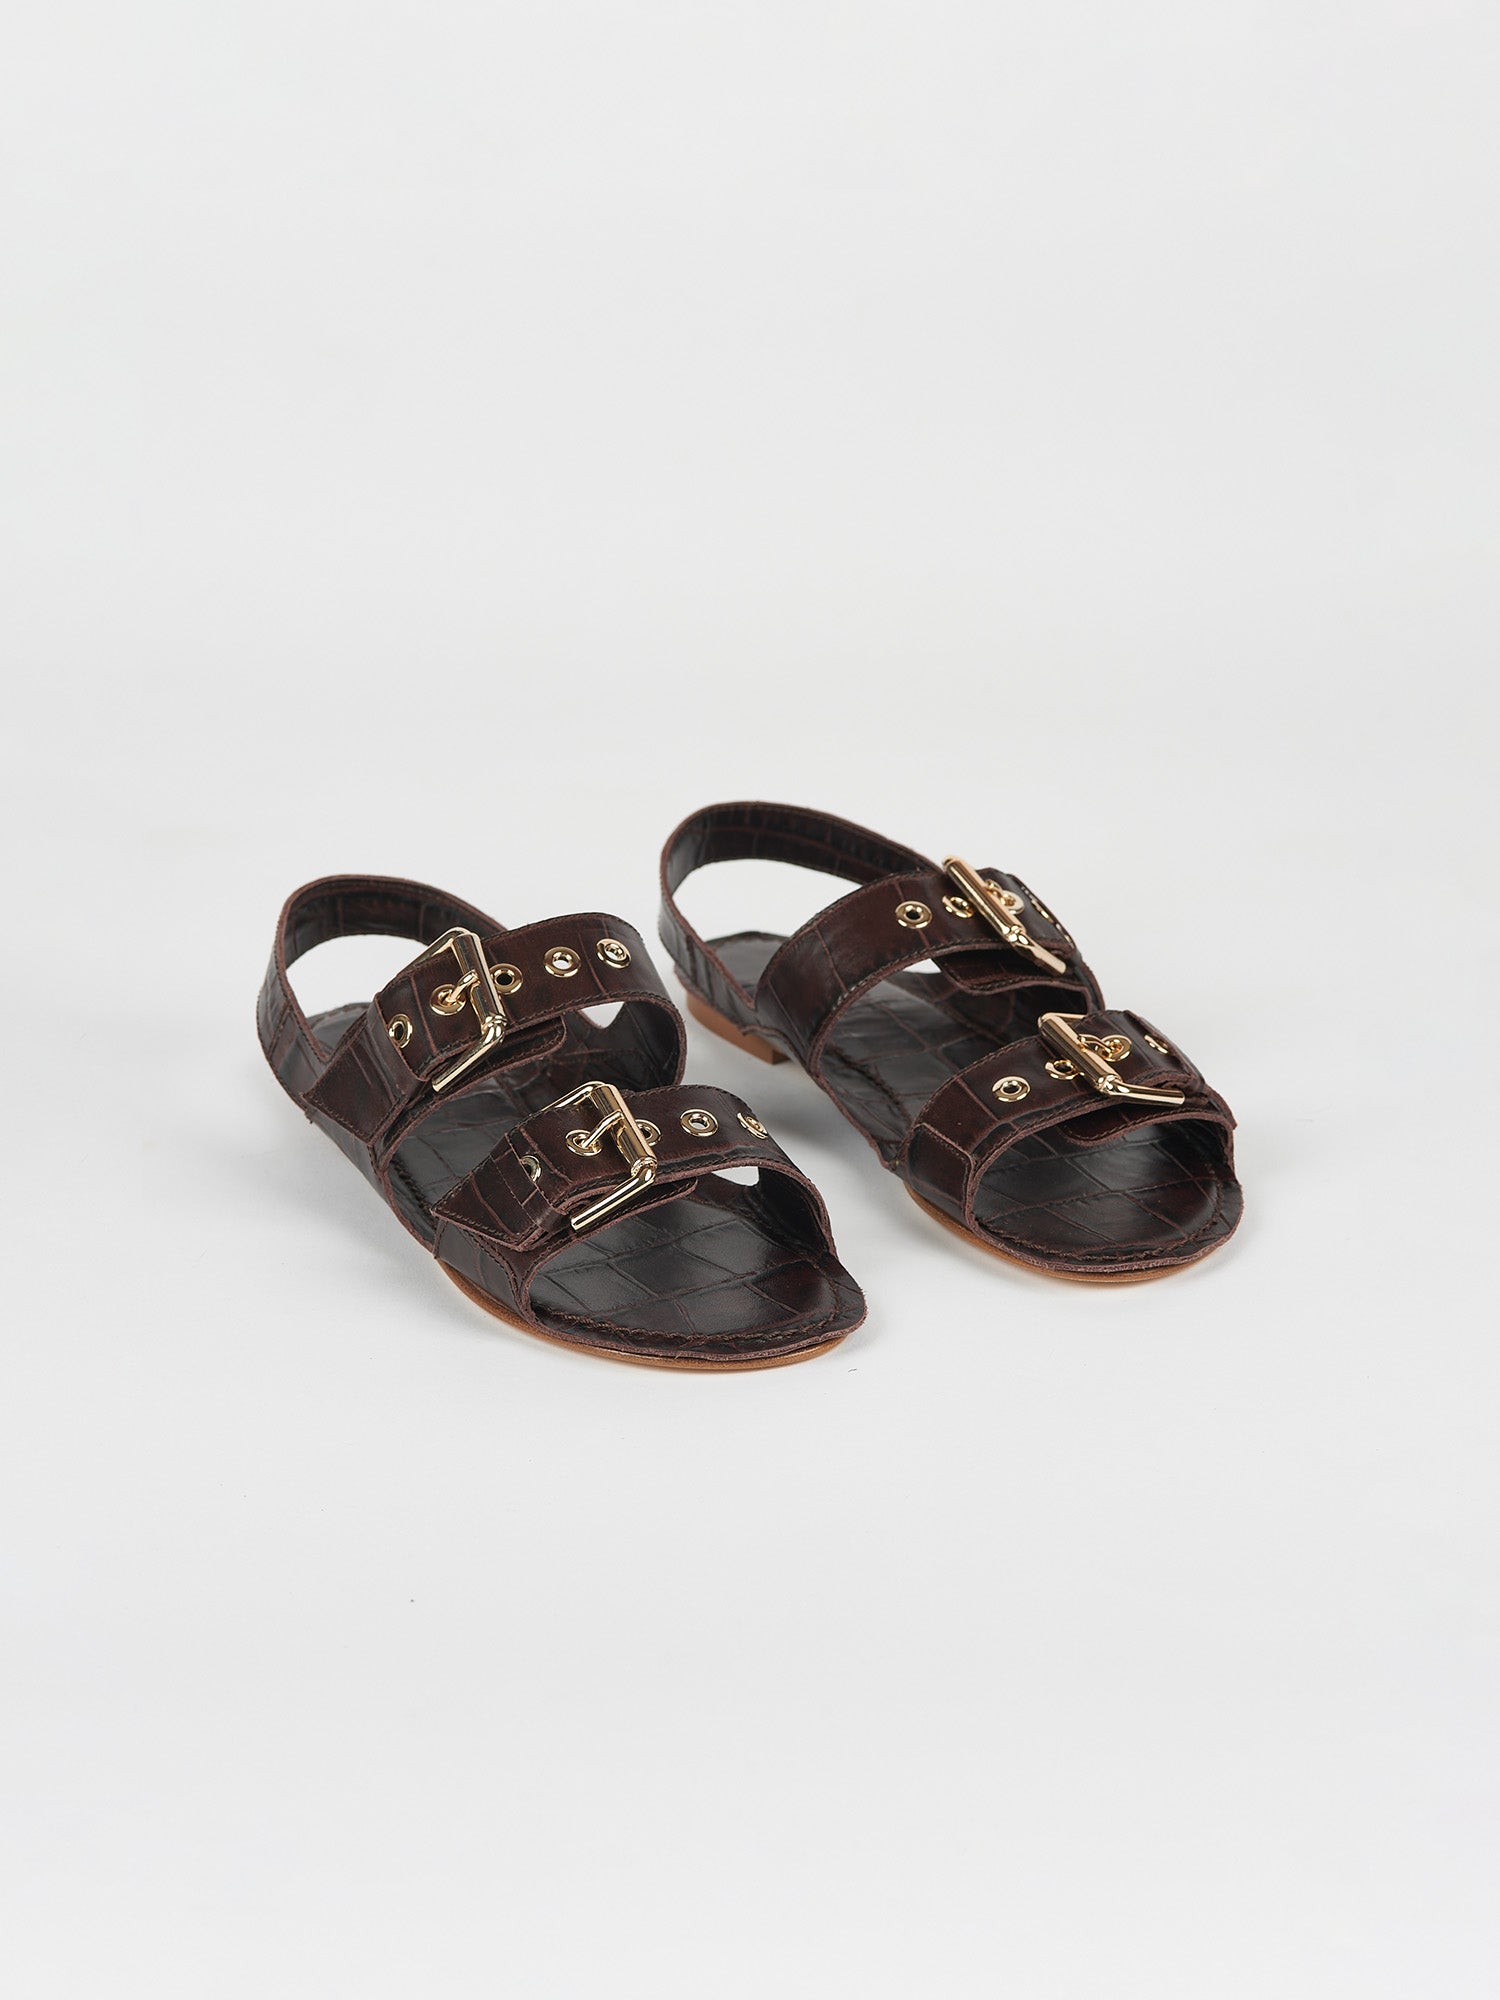 The Double Buckle Sandal in Espresso Croc Angled Front View